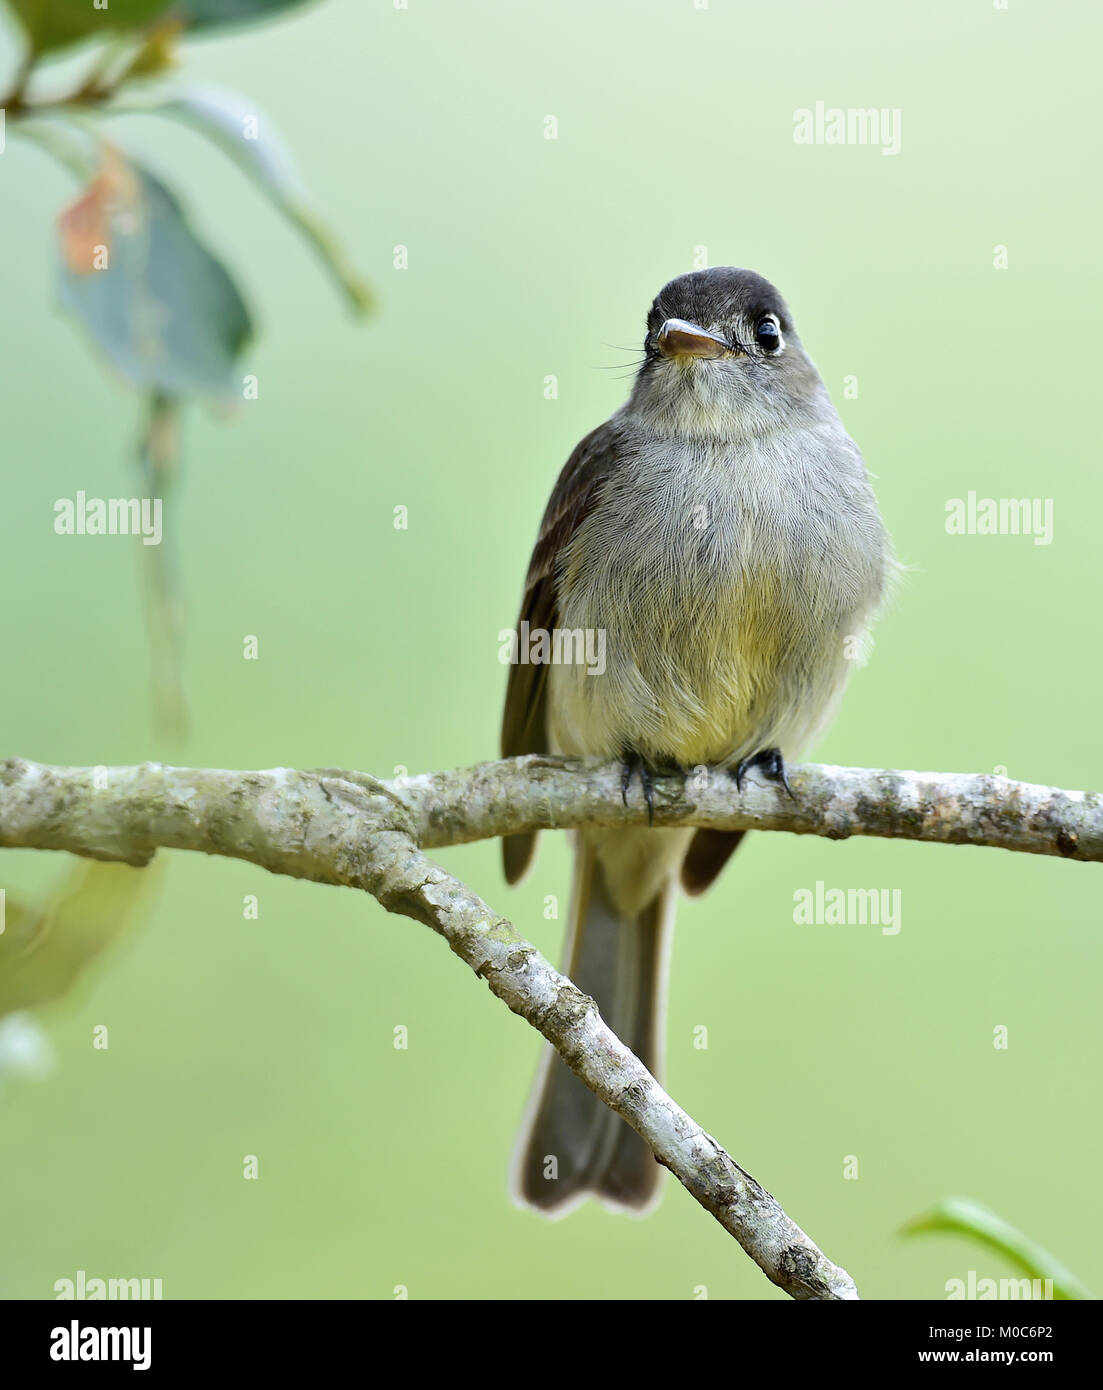 Crescent-eyed pewee or Cuban pewee (Contopus caribaeus) on the branch. Green natural background. Cuba Stock Photo